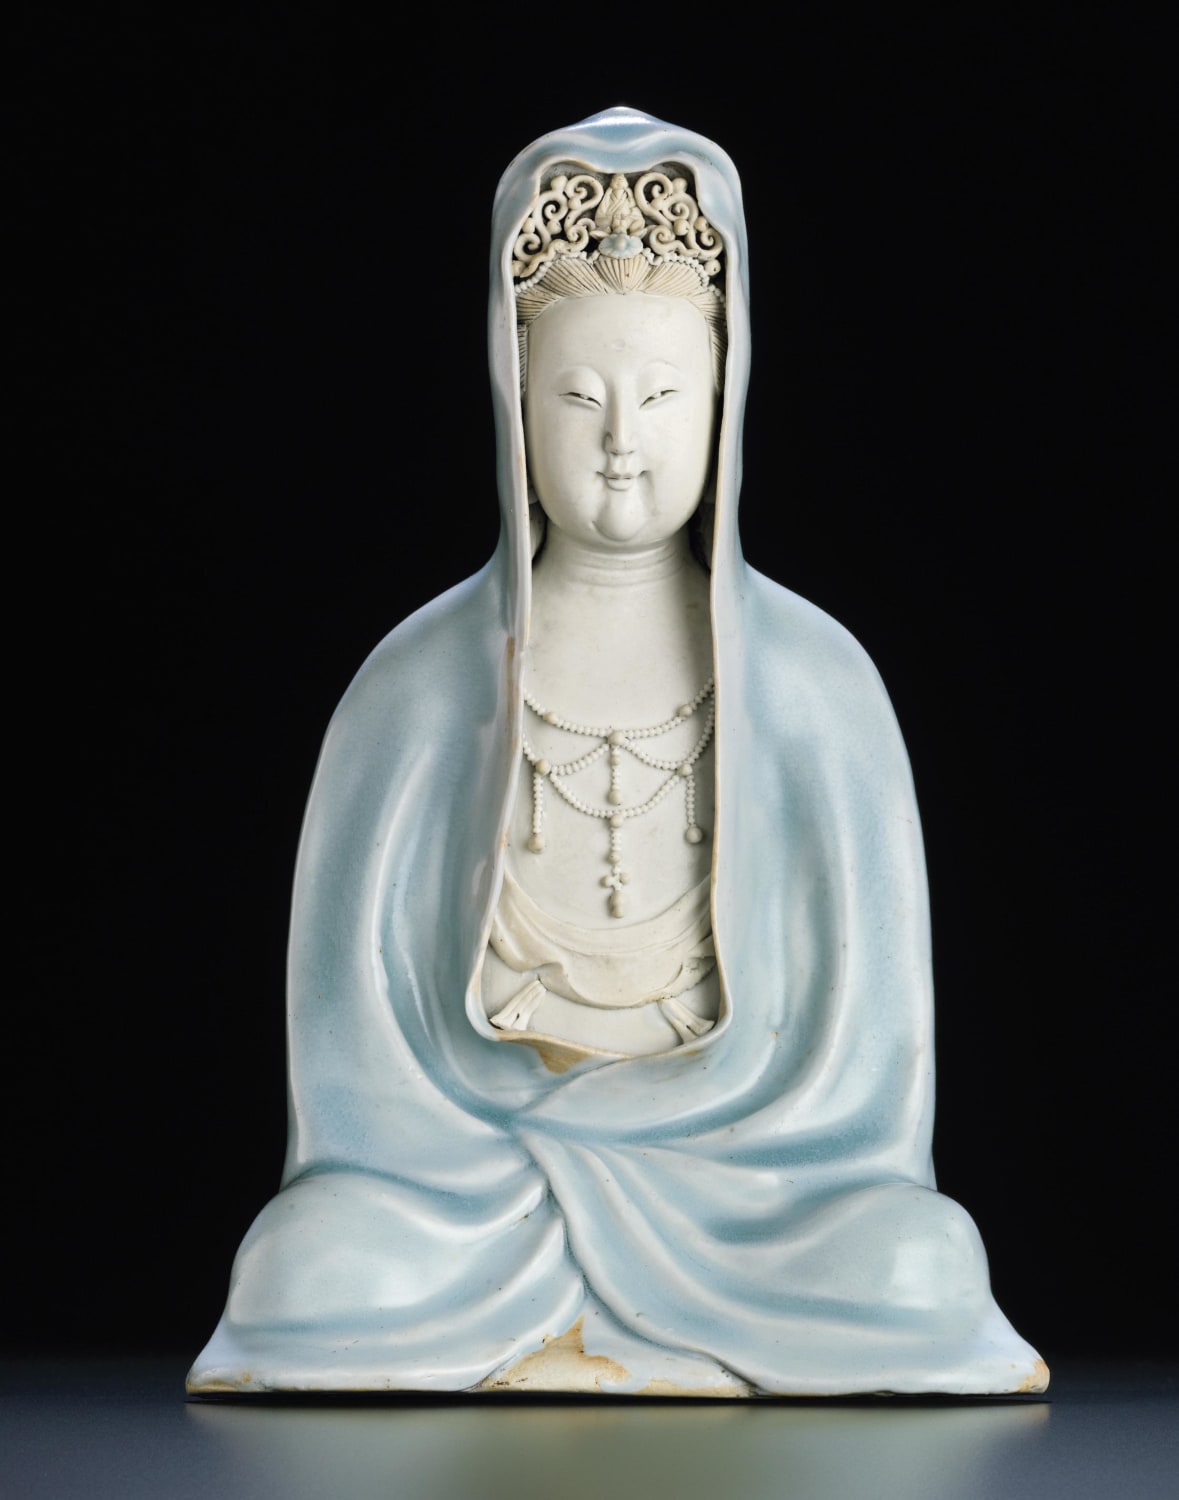 A Qingbai seated figure of Guanyin, southern Song dynasty (1127-1279). Sold at Christie's in 2011 for a world record auction price for Qingbai porcelain